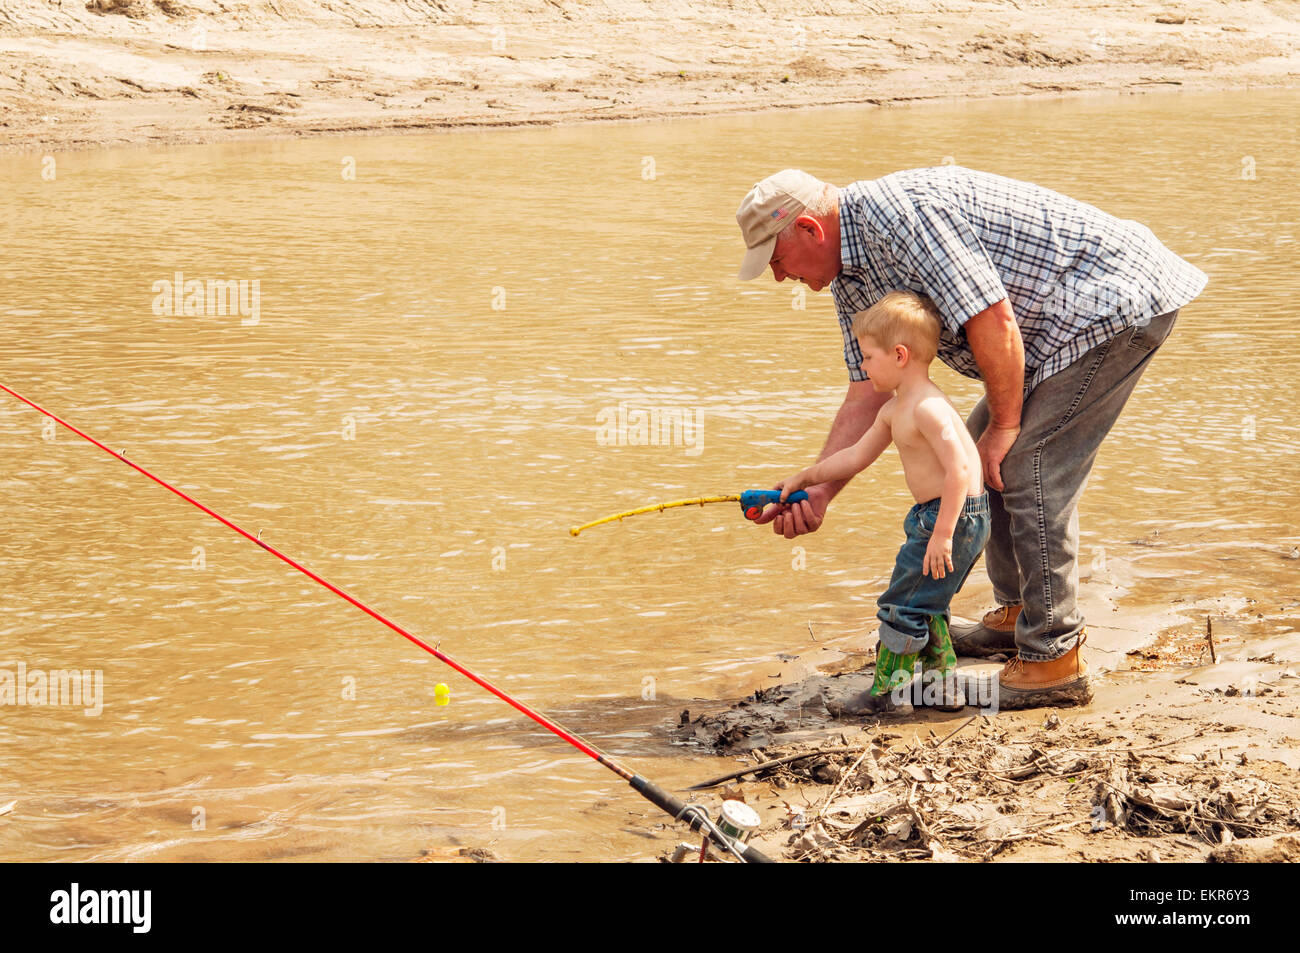 Grandfather teaching grandson to fish with toy rod and reel Stock Photo